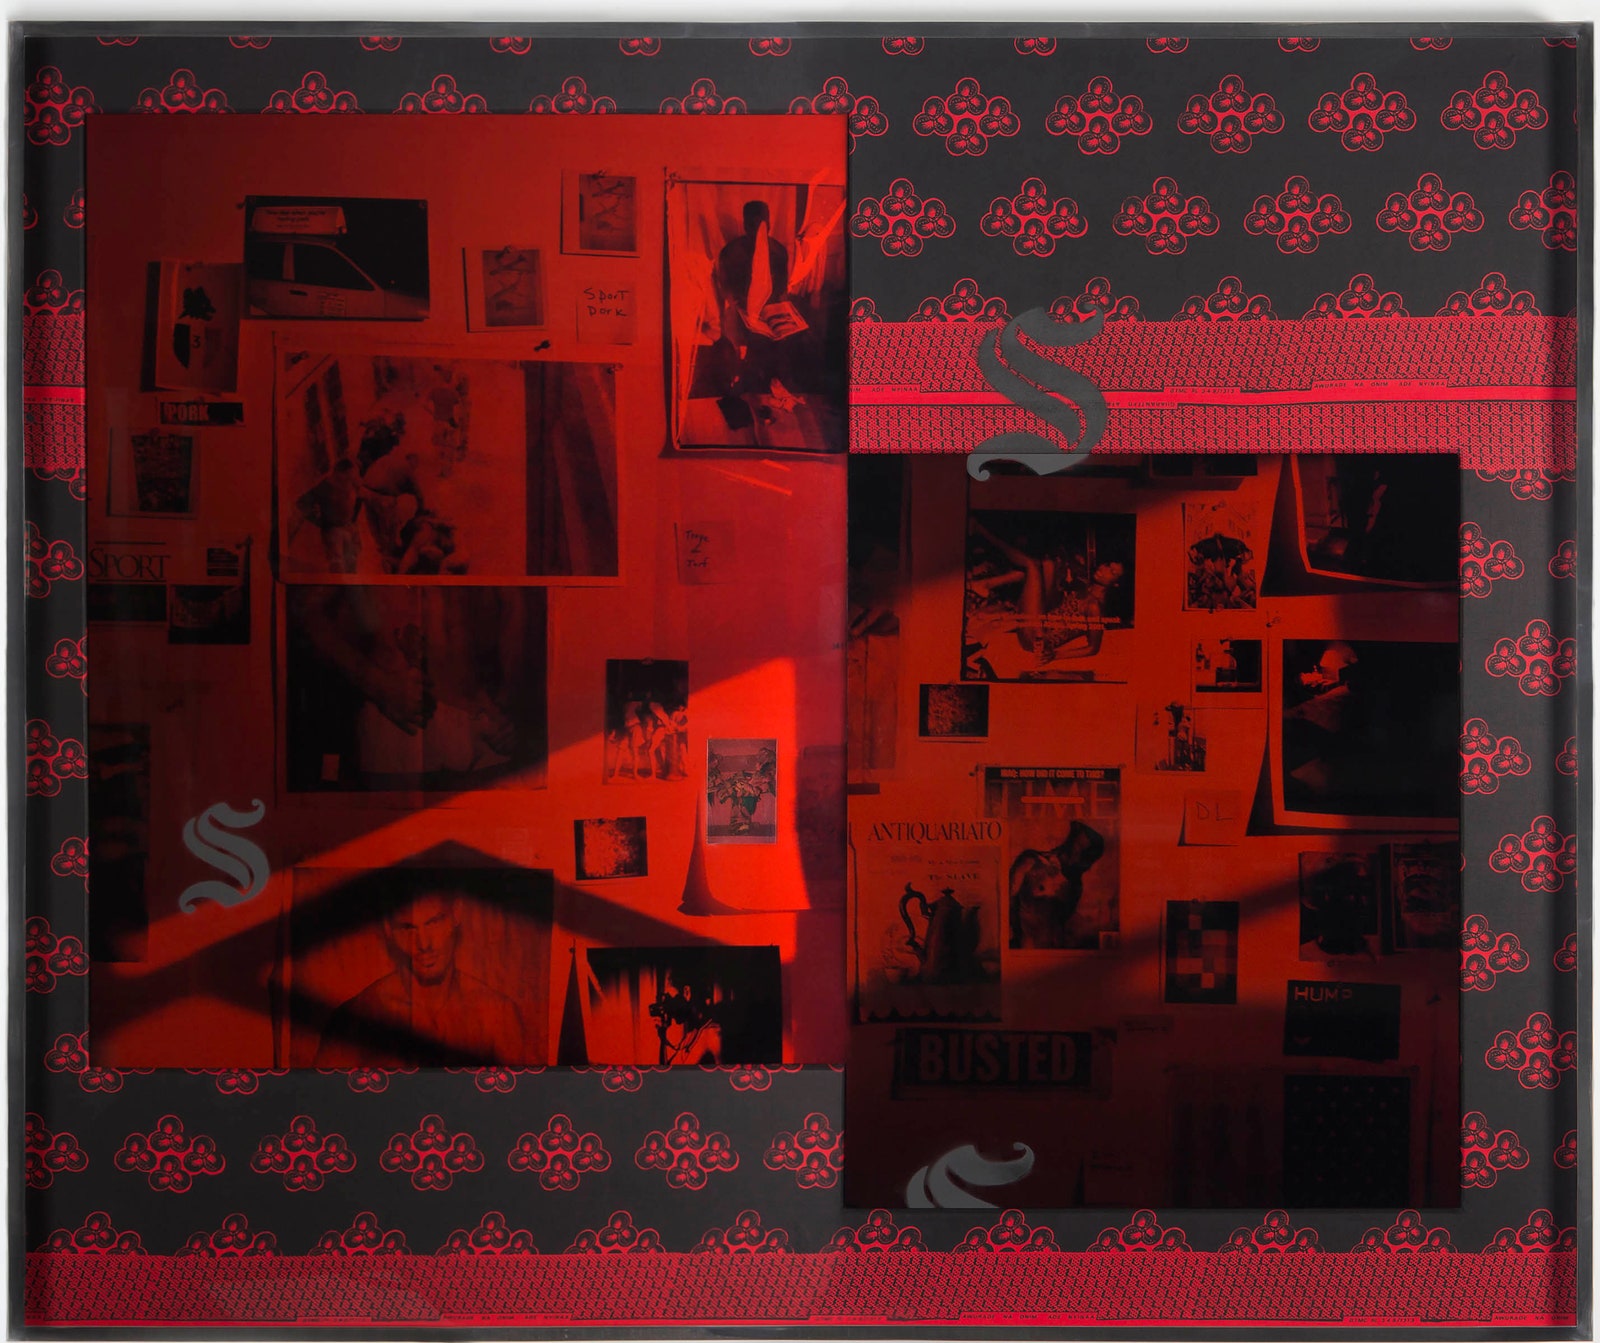 A redtinted collage on a patterned background.